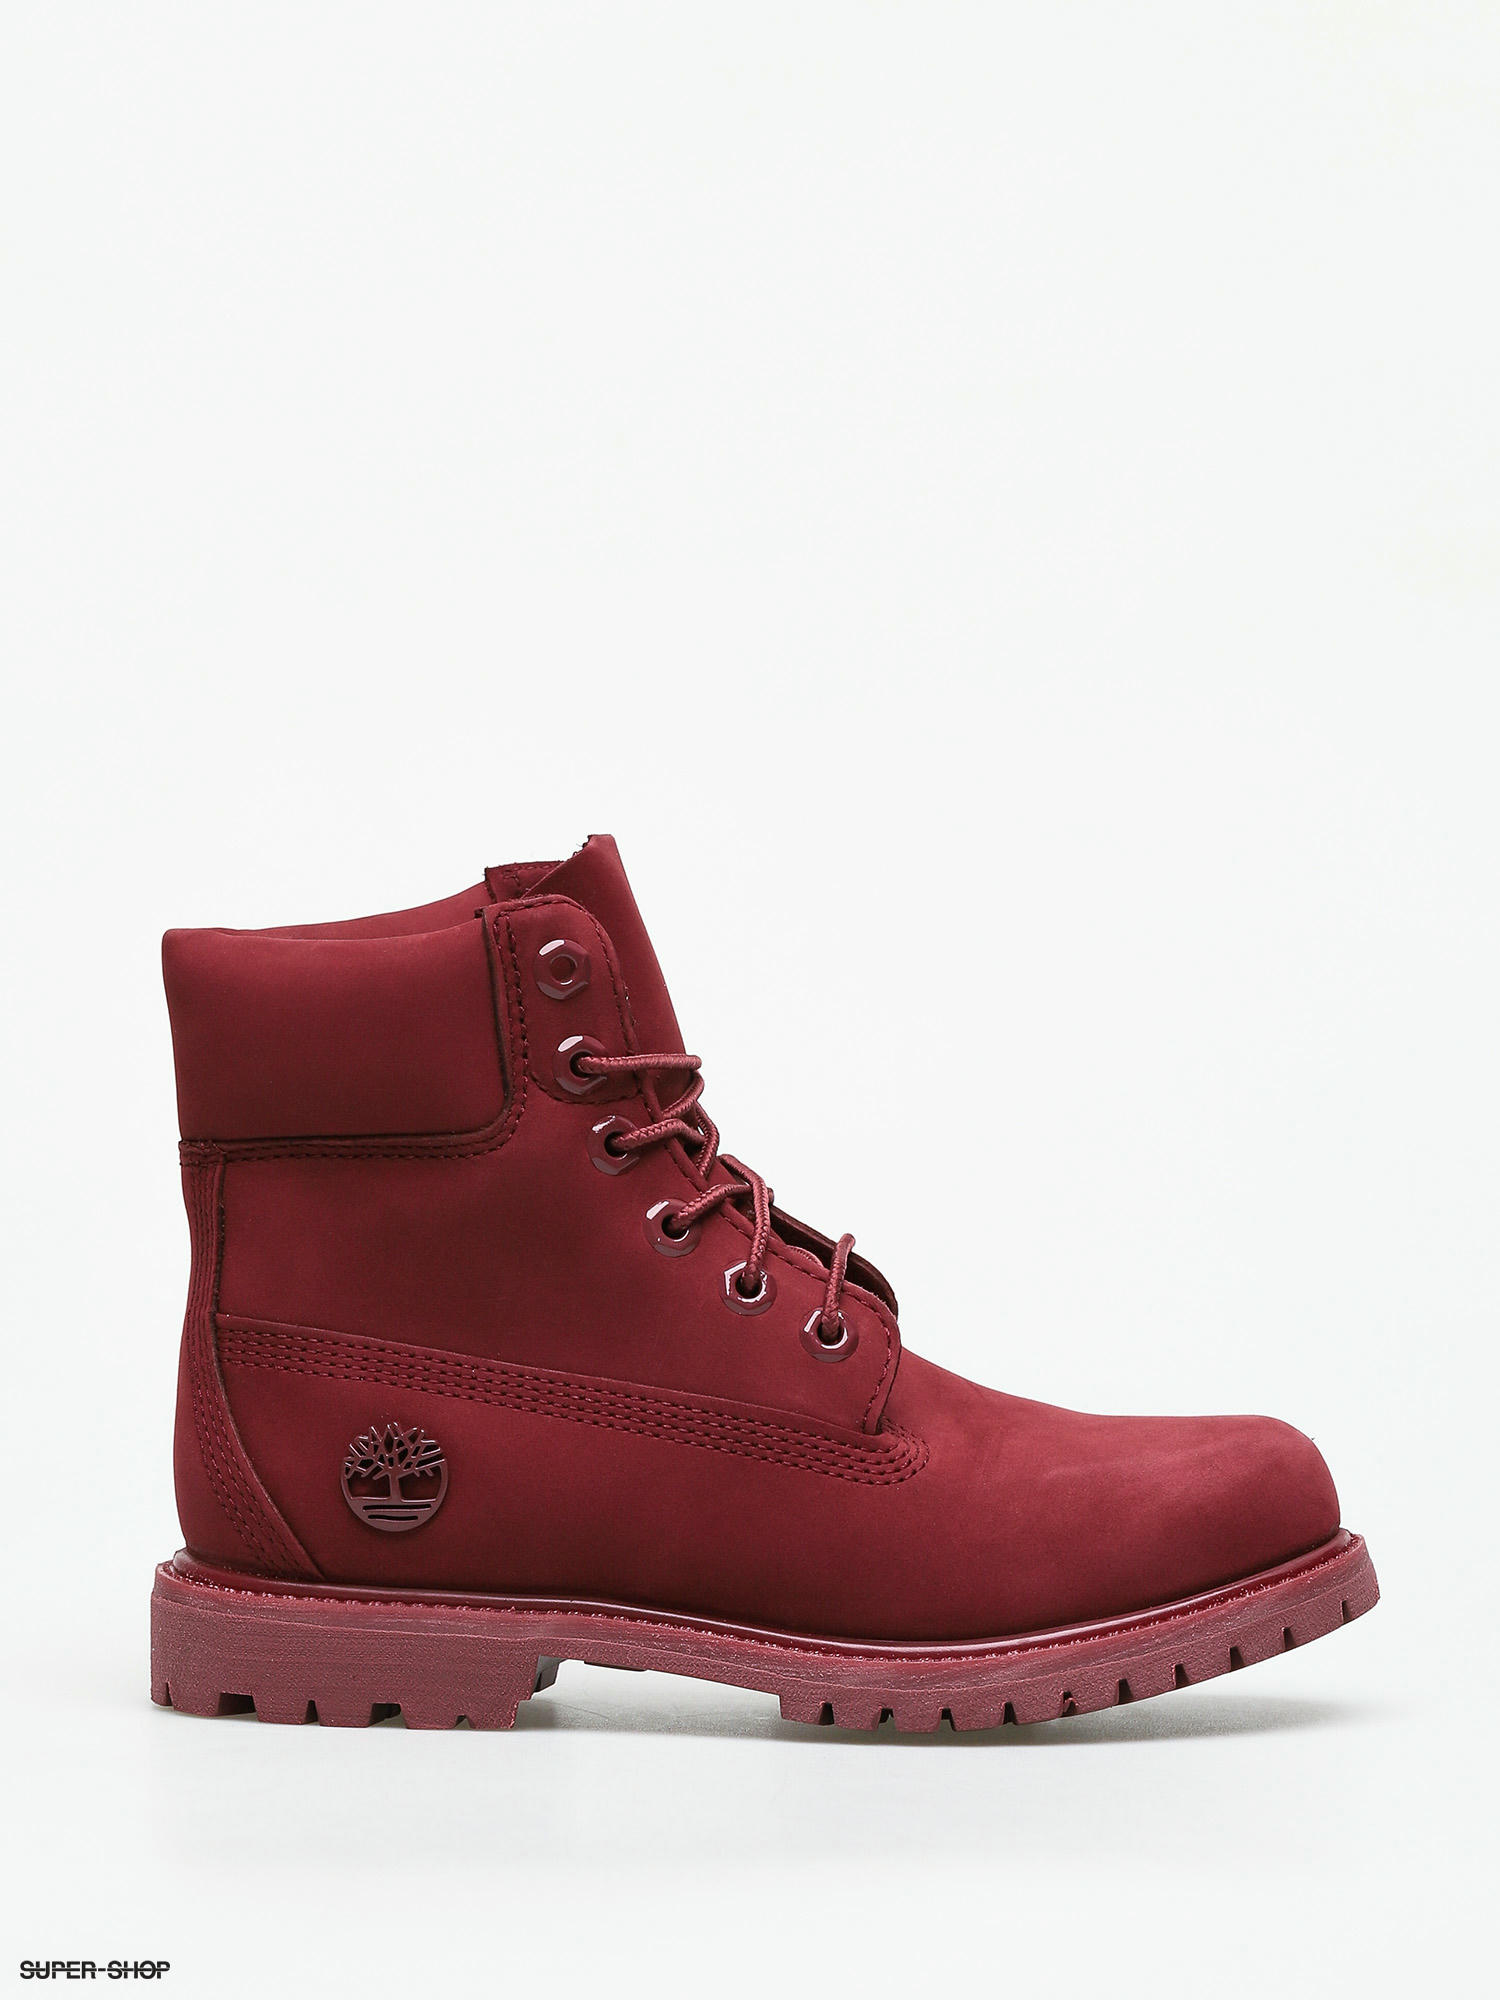 Timberland 6 in Premium Winter shoes 